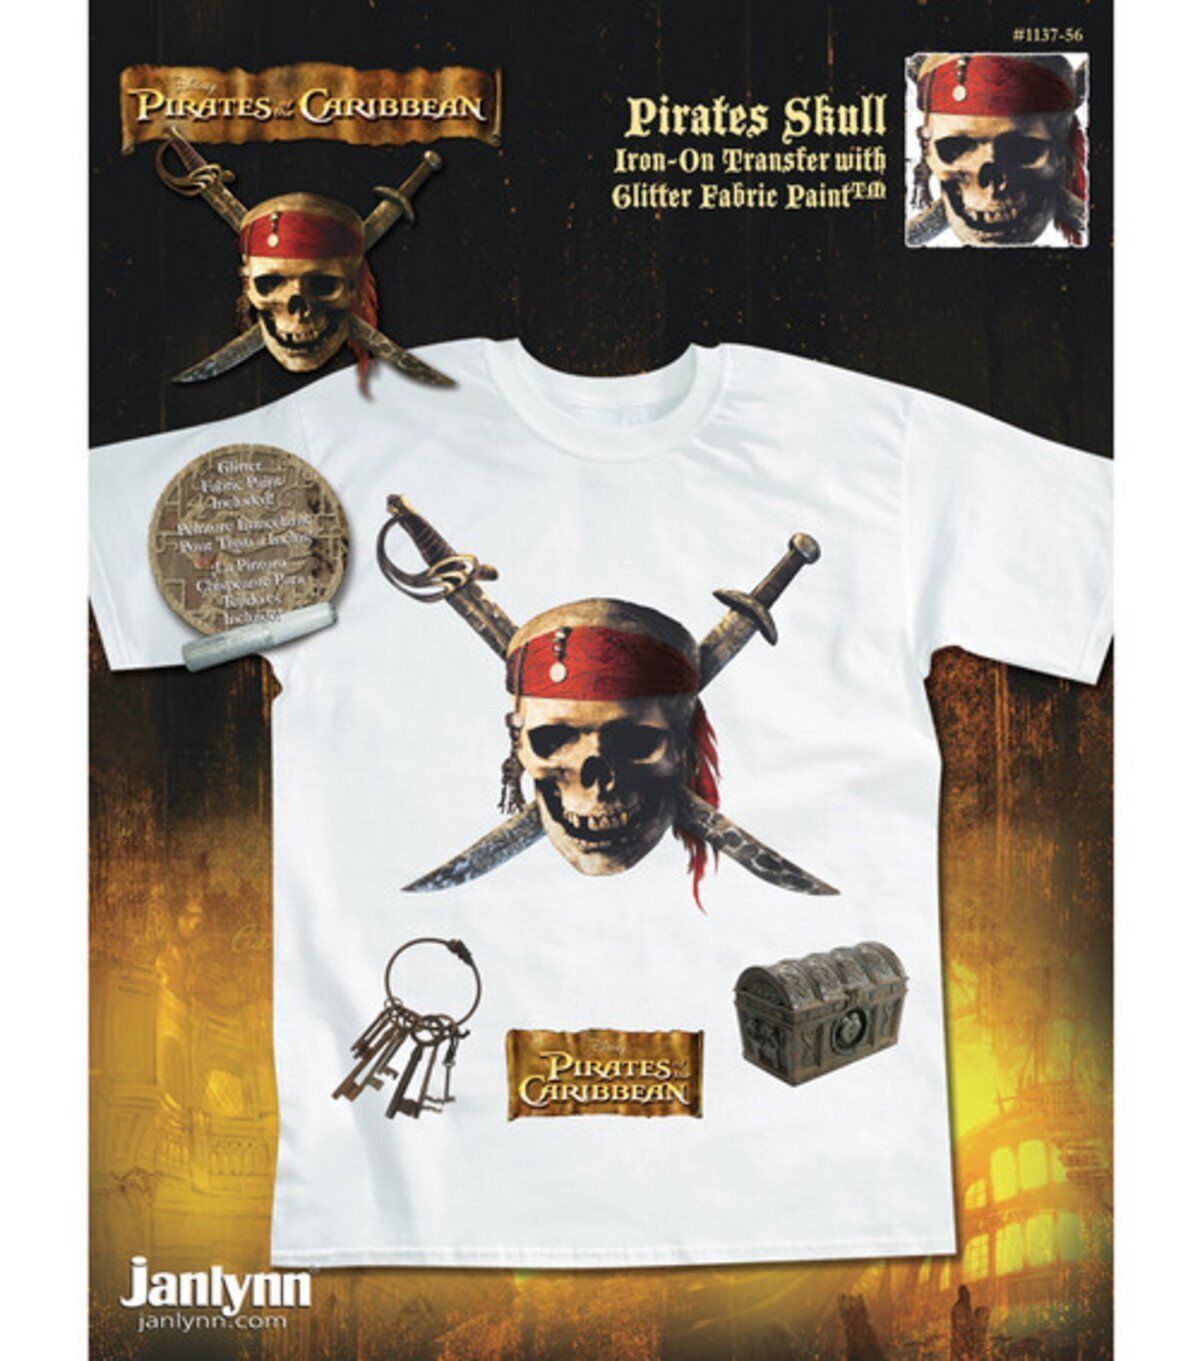 Lot of 2 - NEW Disney Pirates Of The Caribbean Iron On Transfer Skull and Swords Janlynn Does not apply